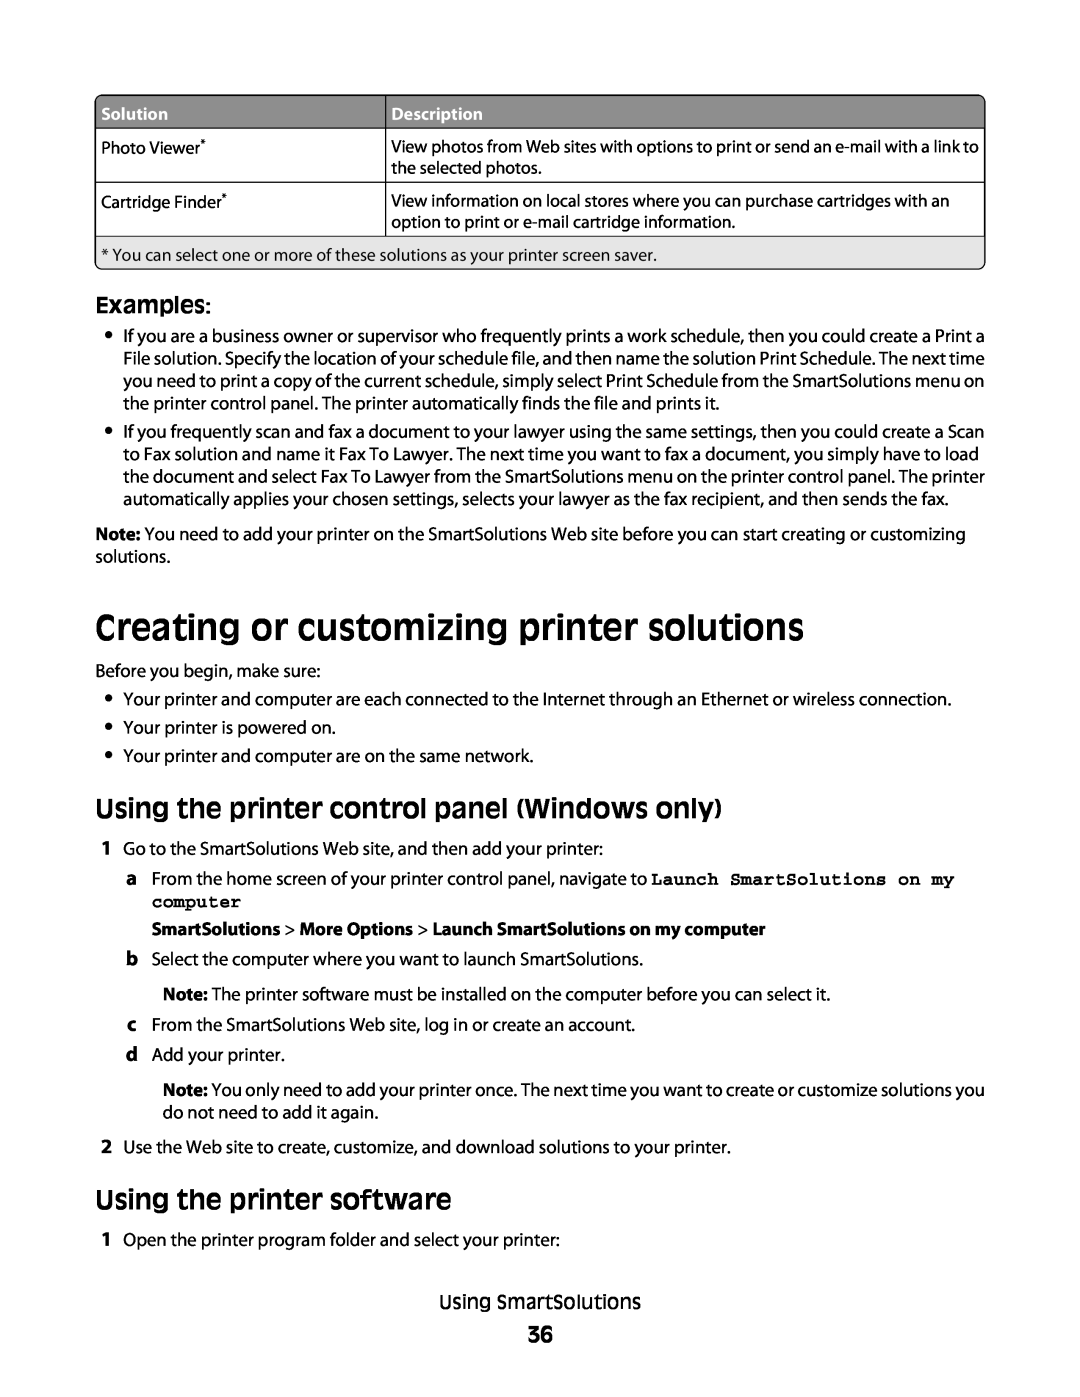 Lexmark Pro803, Pro800 Creating or customizing printer solutions, Using the printer control panel Windows only, Examples 